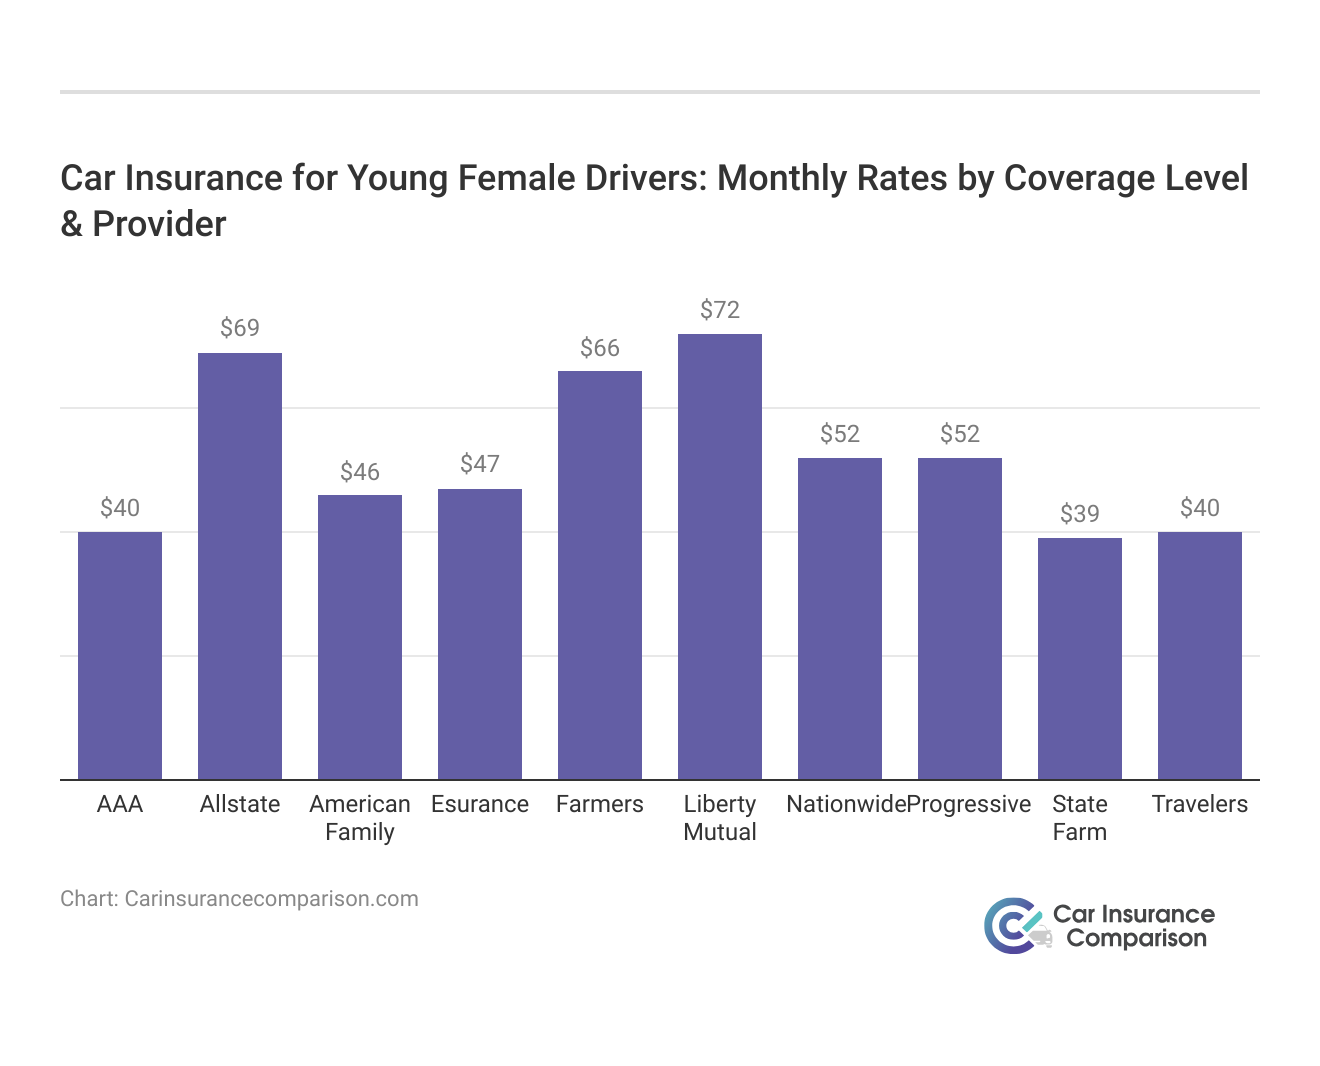 <h3>Car Insurance for Young Female Drivers: Monthly Rates by Coverage Level & Provider</h3>